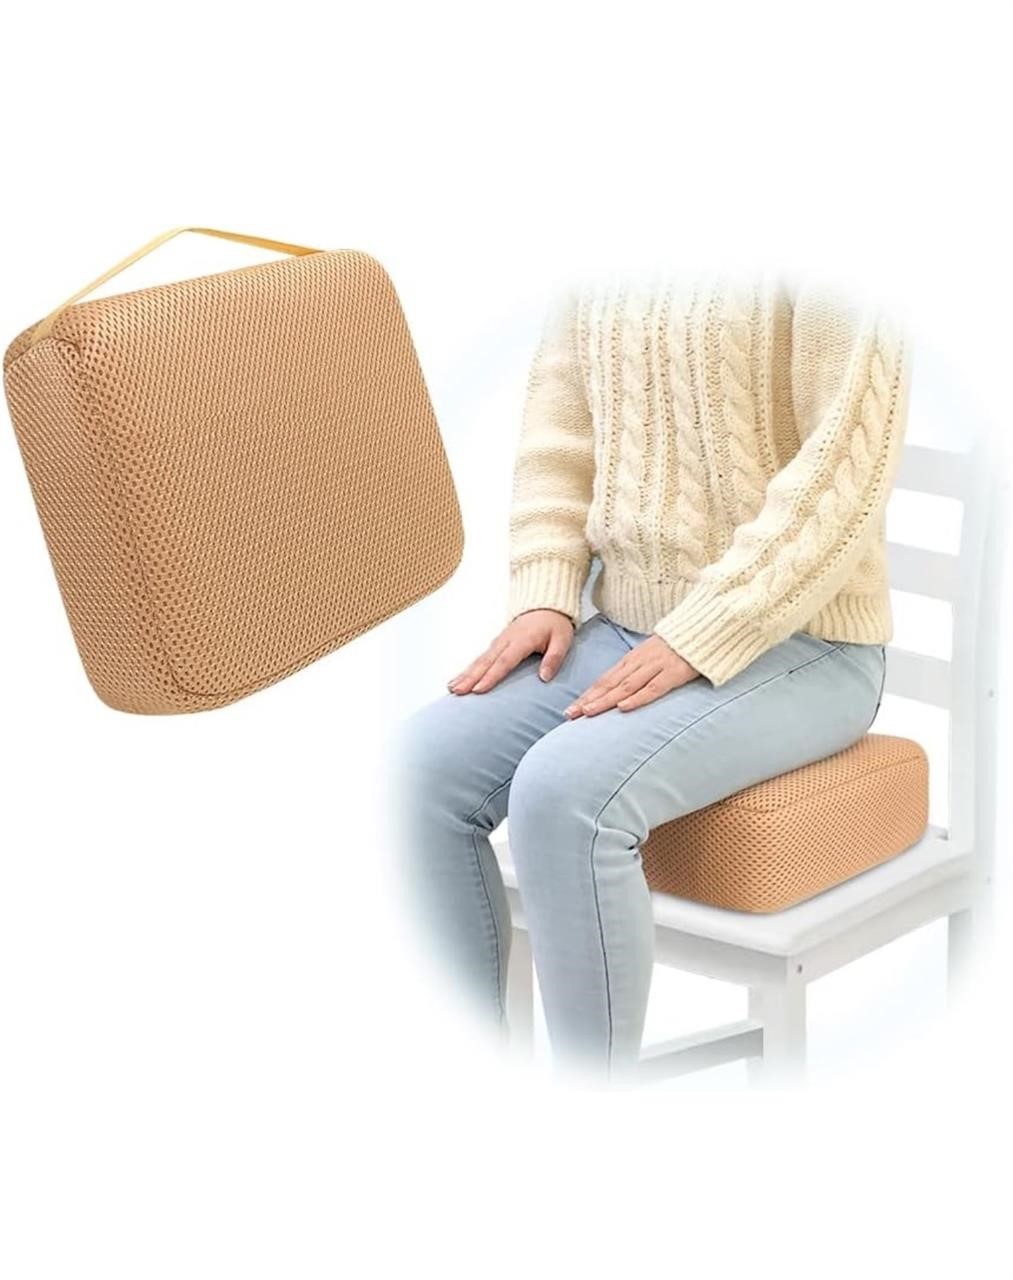 $90 Zelen Extra Thick Chair Cushion 4.5” Booster